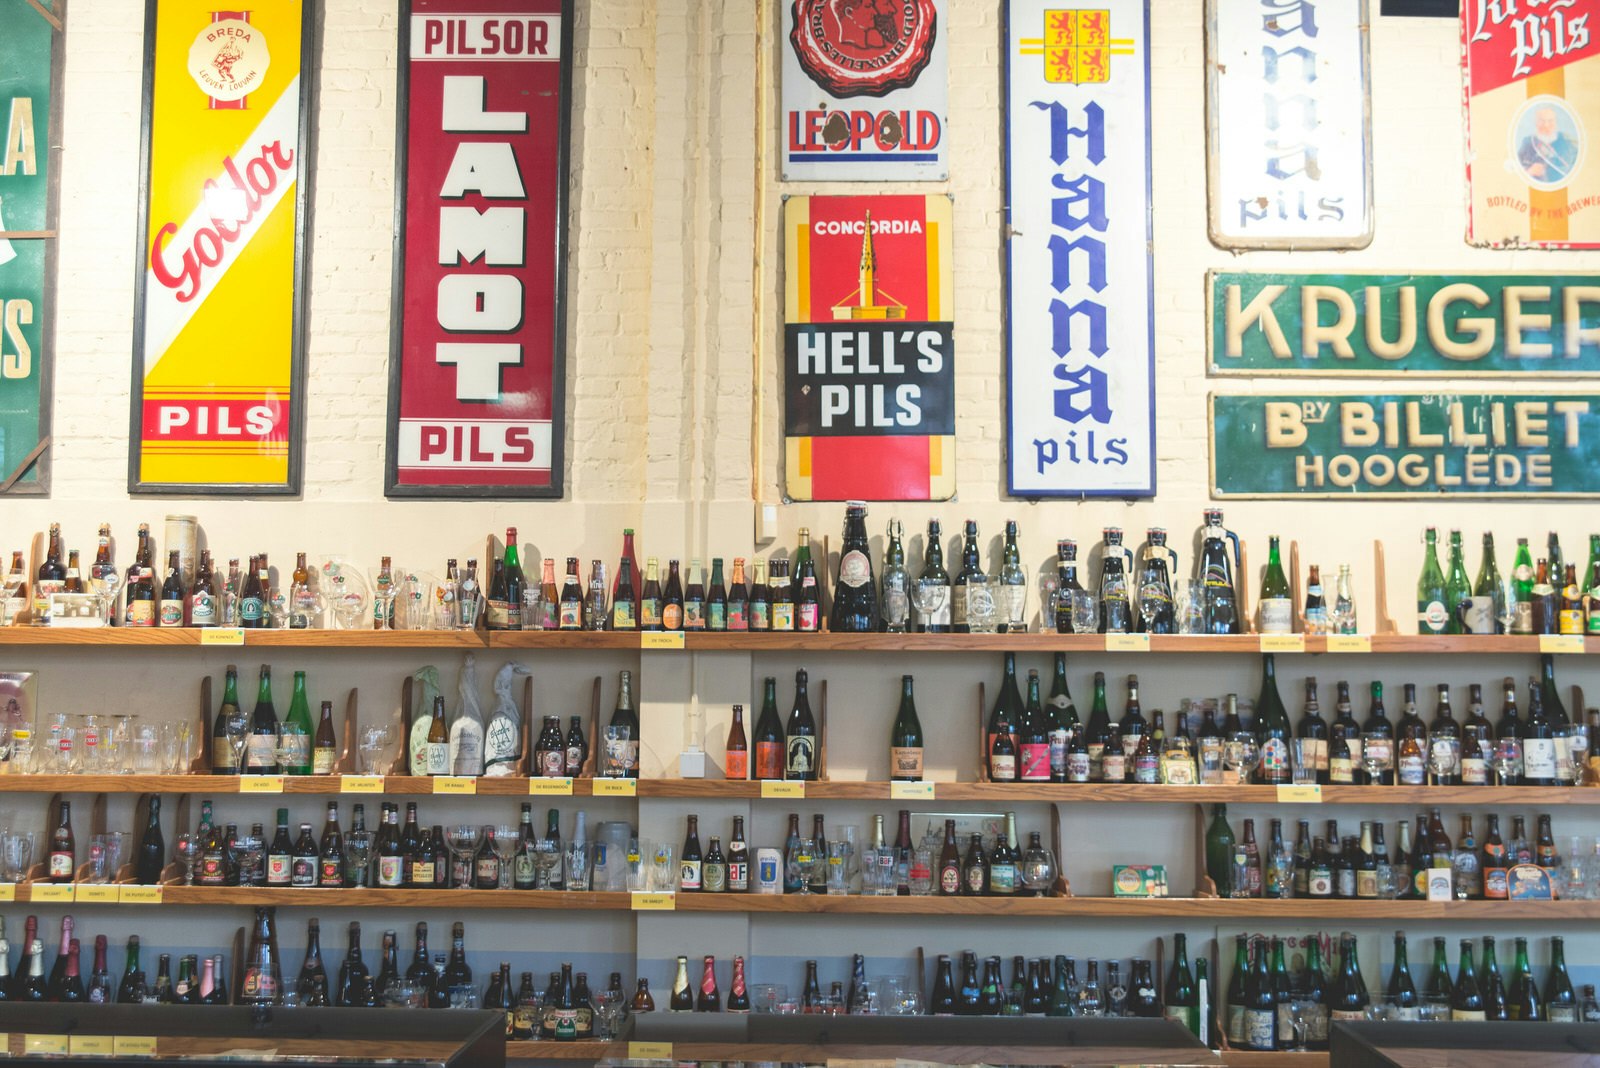 Wooden shelves are lined with beer bottles and glasses of different sizes and colours. Old-fashioned tin signs advertising beers are hung on the wall.